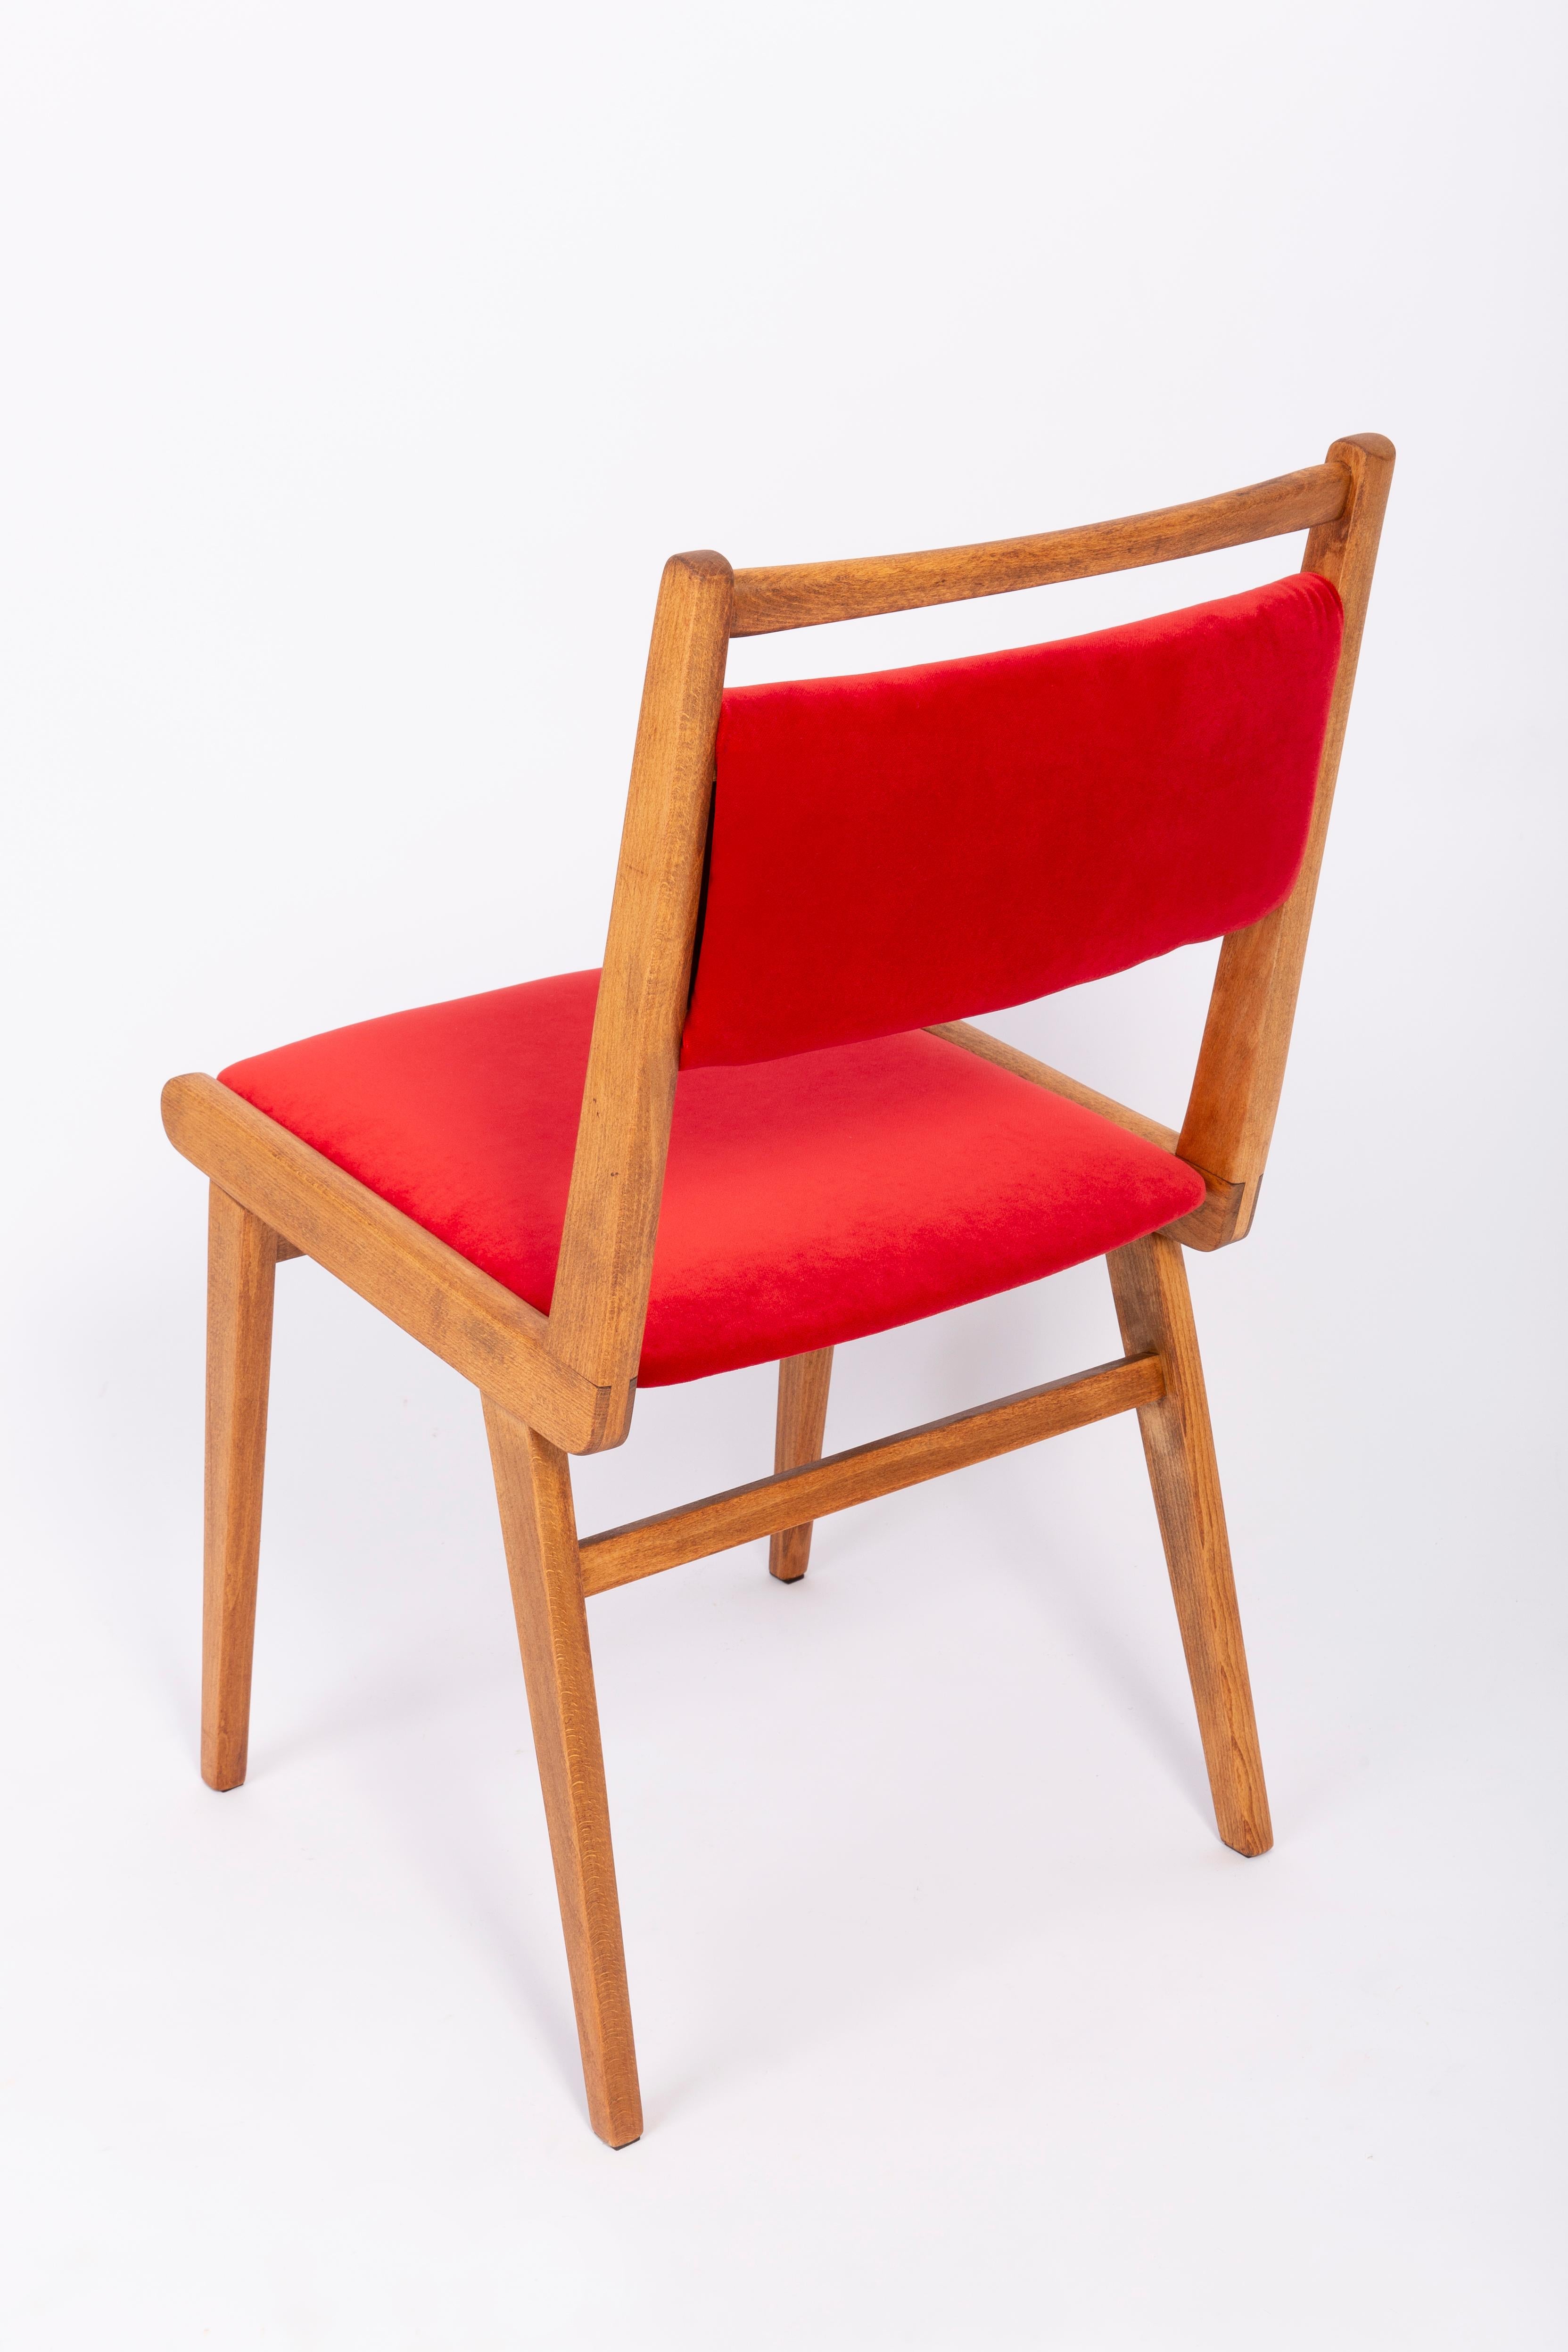 Set of Eight 20th Century Red Velvet Chairs, by Rajmund Halas, Poland, 1960s For Sale 2